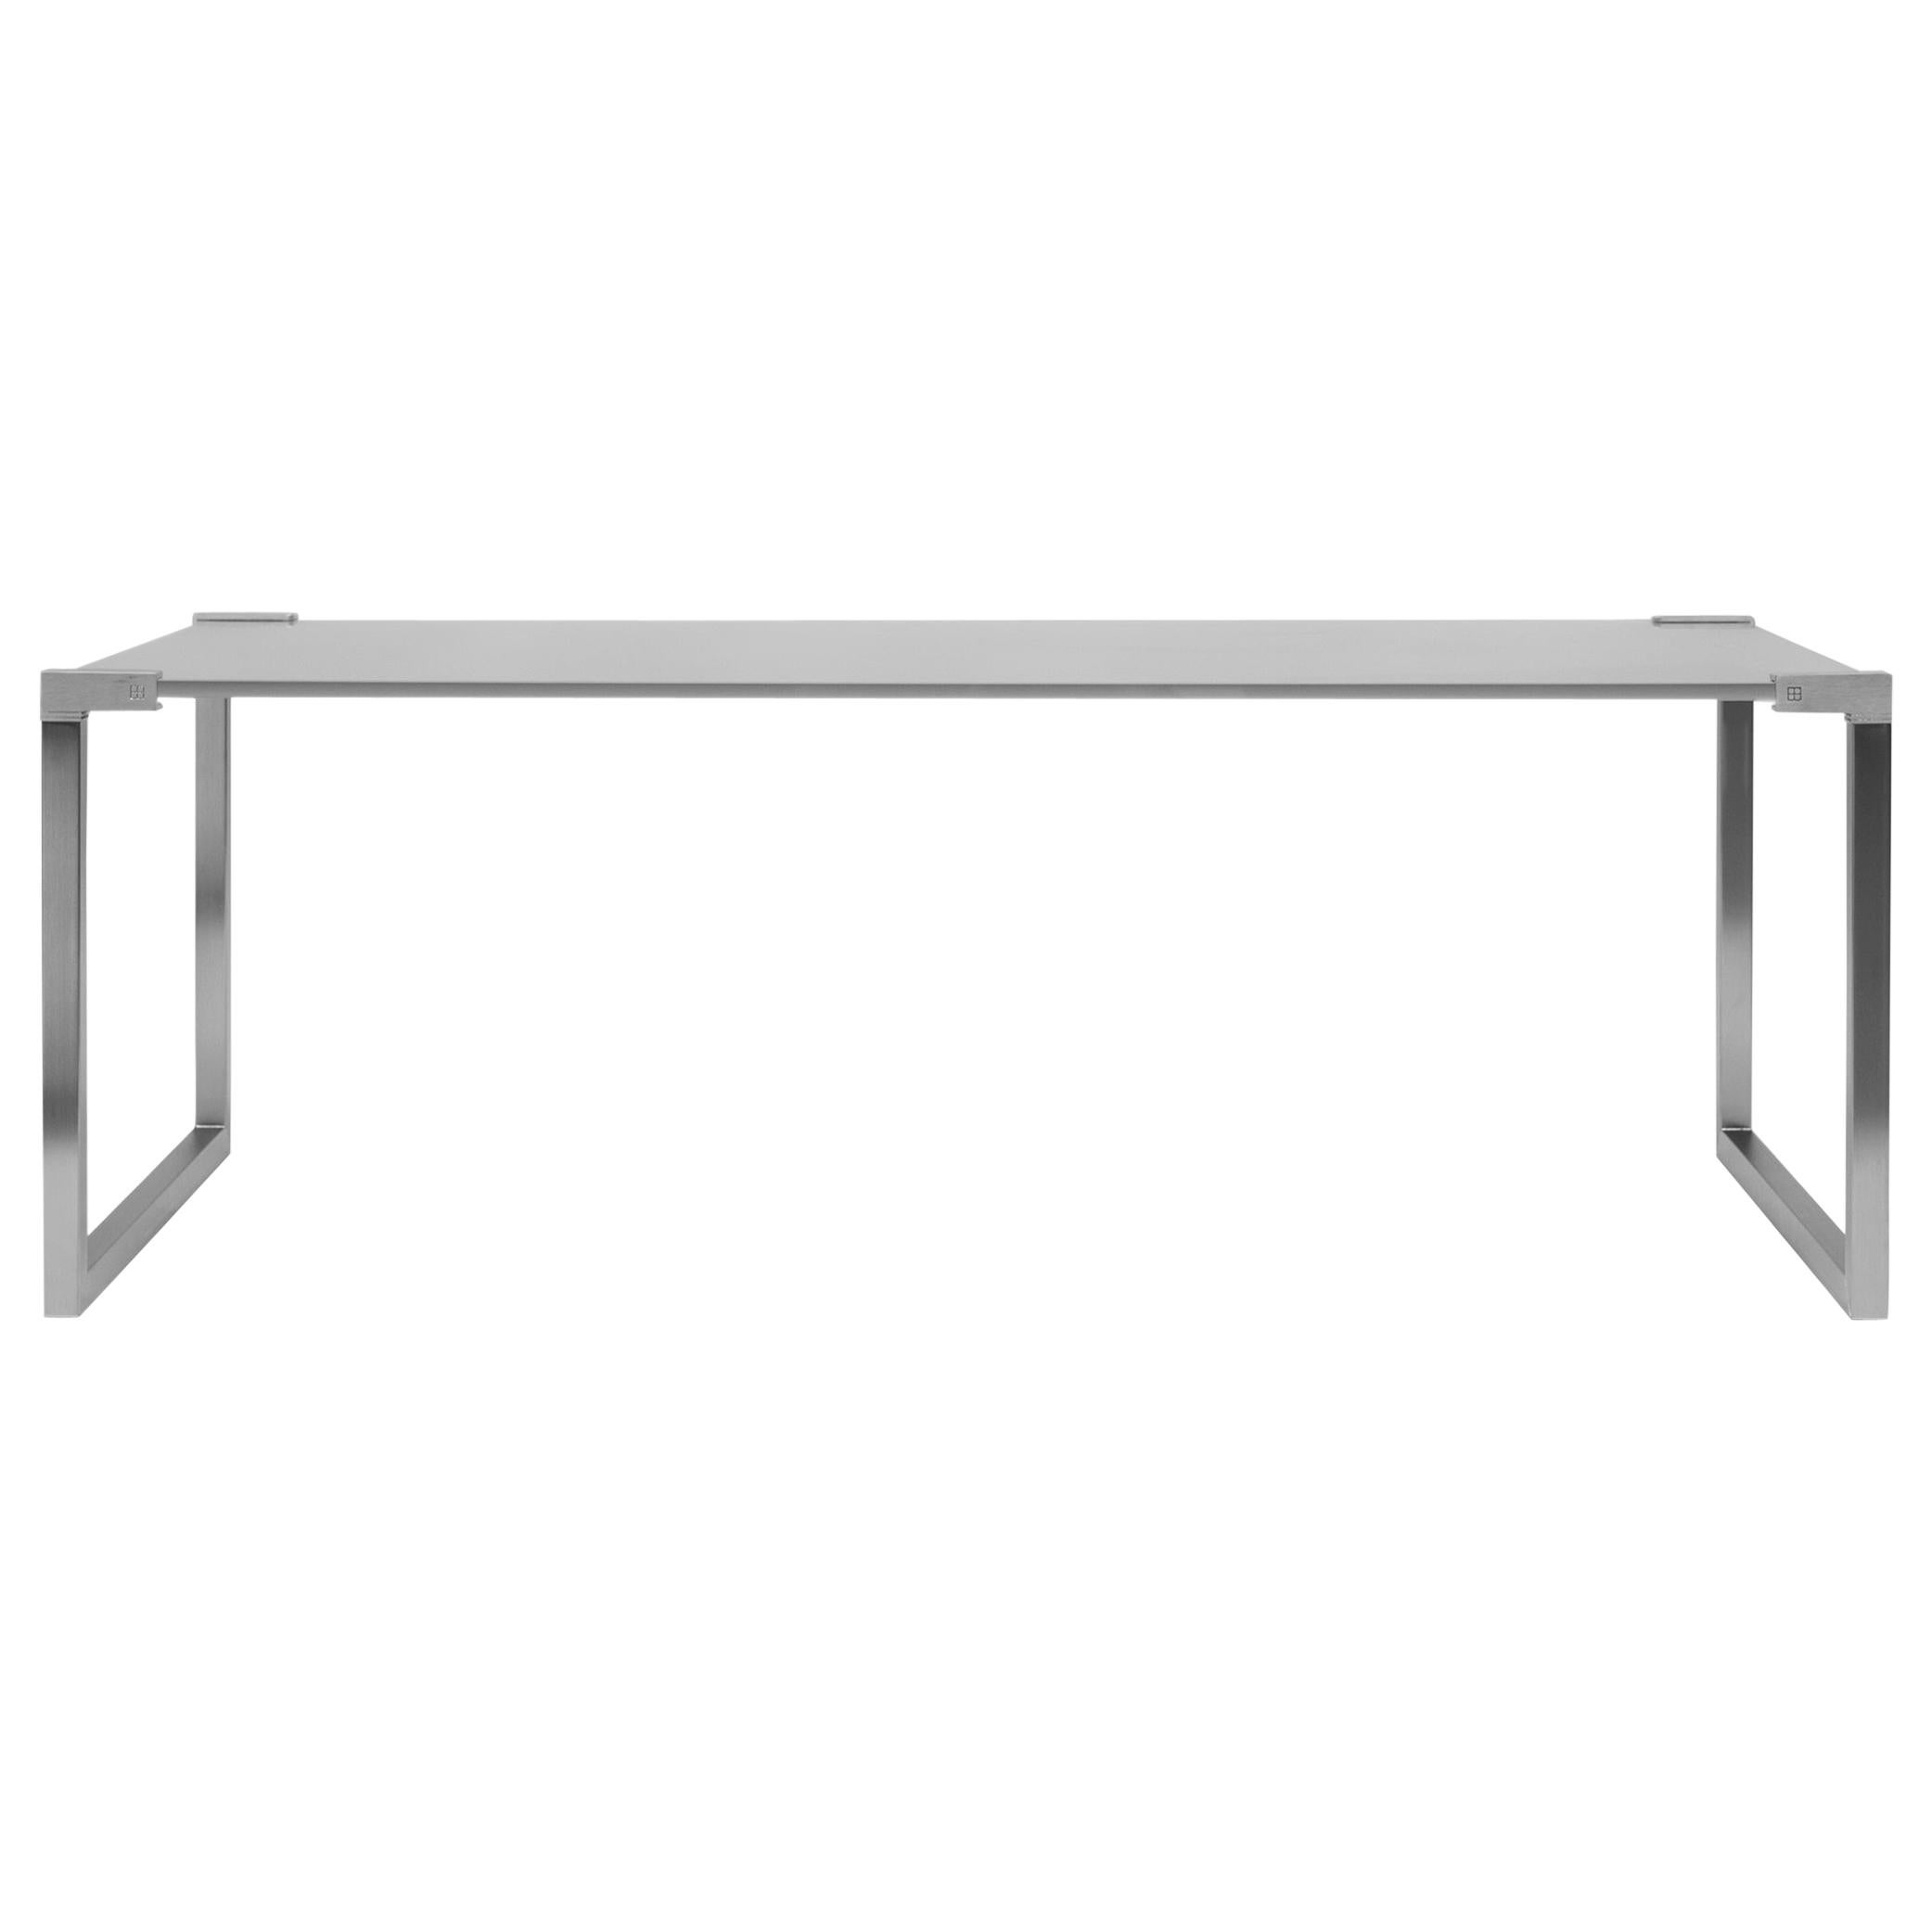 21st Century Minimalist Stainless Steel 'Mirren' T53 Glass Coffee Table For Sale